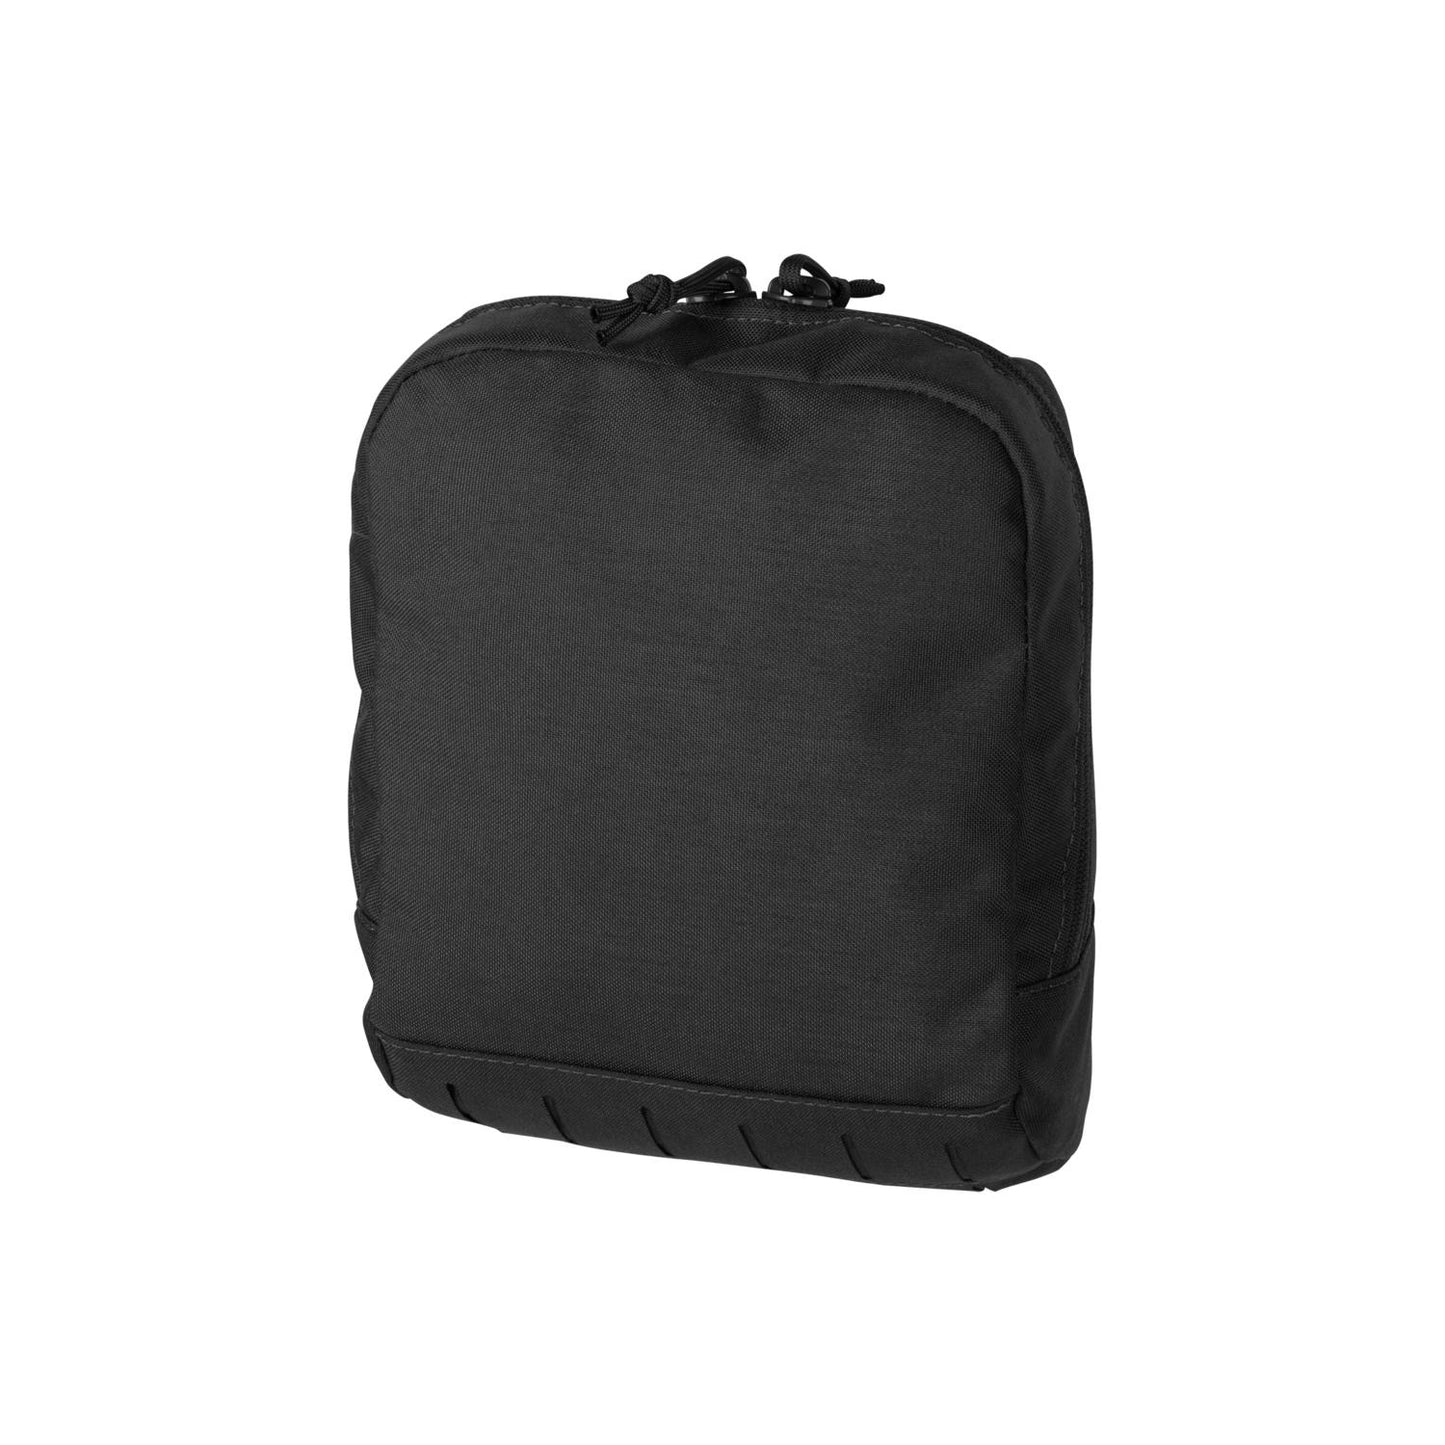 DIRECT ACTION UTILITY POUCH X-LARGE